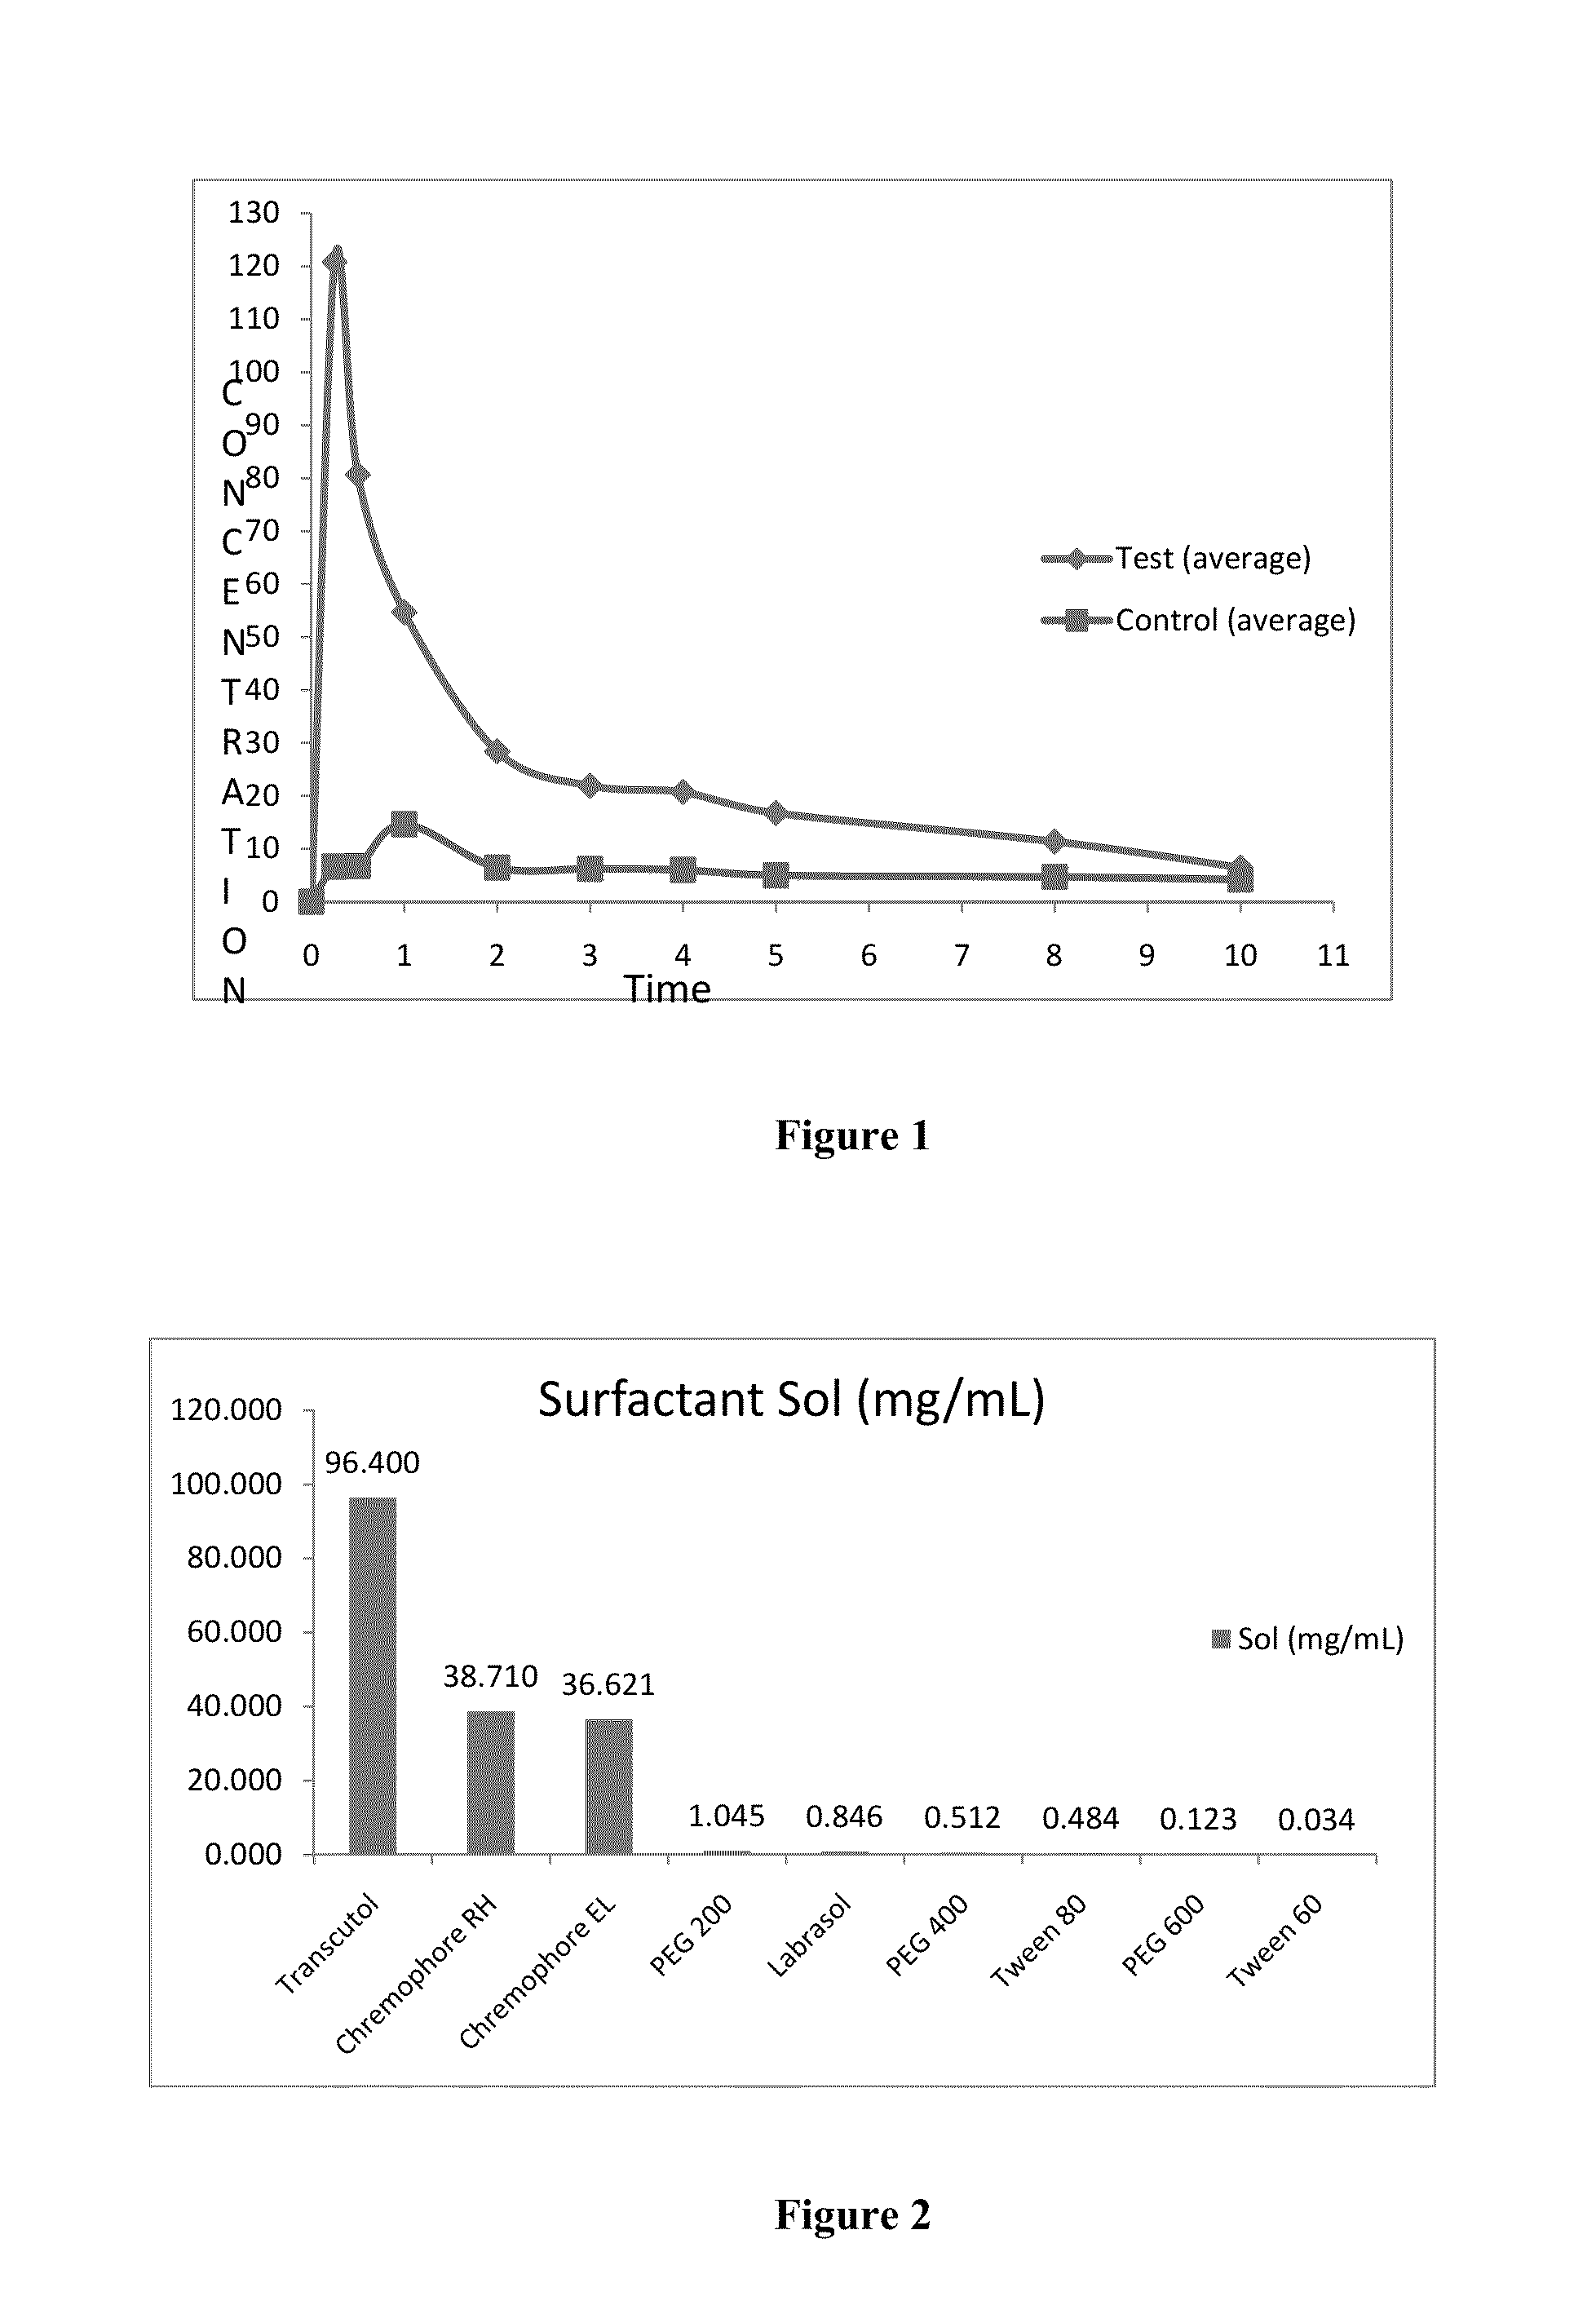 Self emulsifying drug delivery system for a curcuminoid based composition